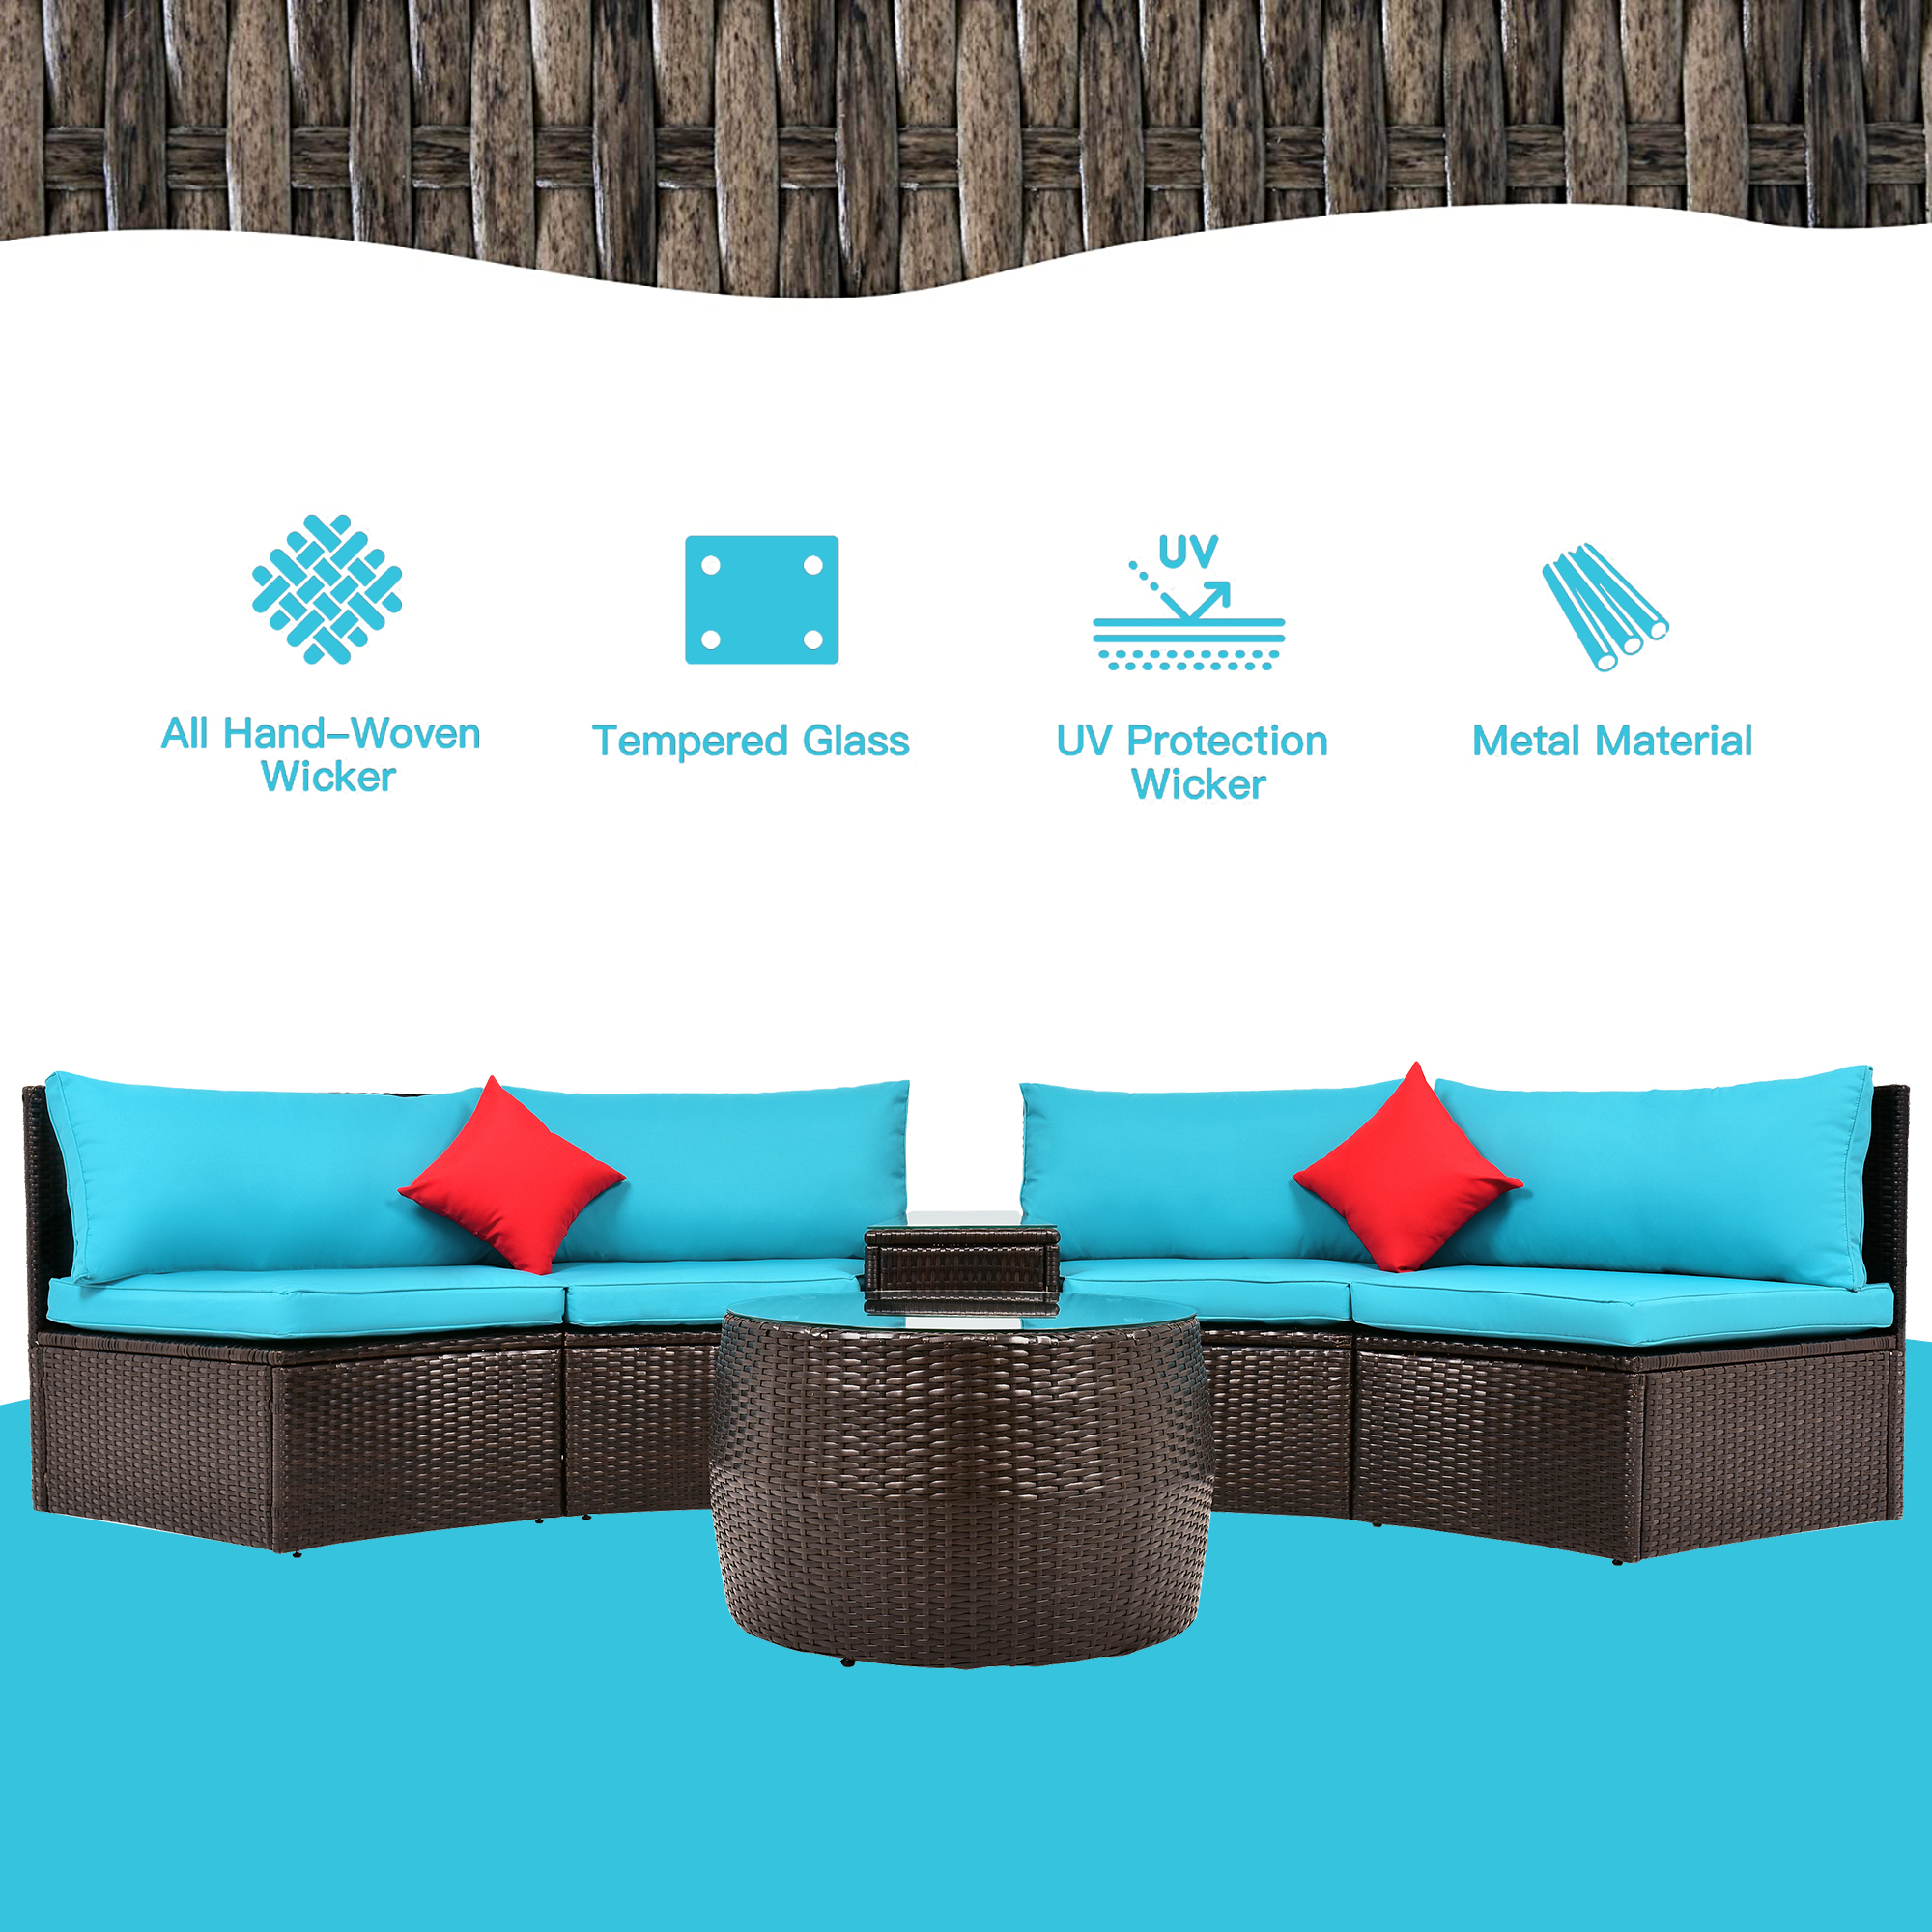 Outdoor Patio Sectional Furniture Wicker Sofa Set, 4-Piece Wicker Patio Conversation Furniture Set with 2 Double Half-Moon Sofa, 1 Coffee Table, 1 Side Table, 2 Pillow, Blue Padded Cushions, S1605 - image 4 of 9